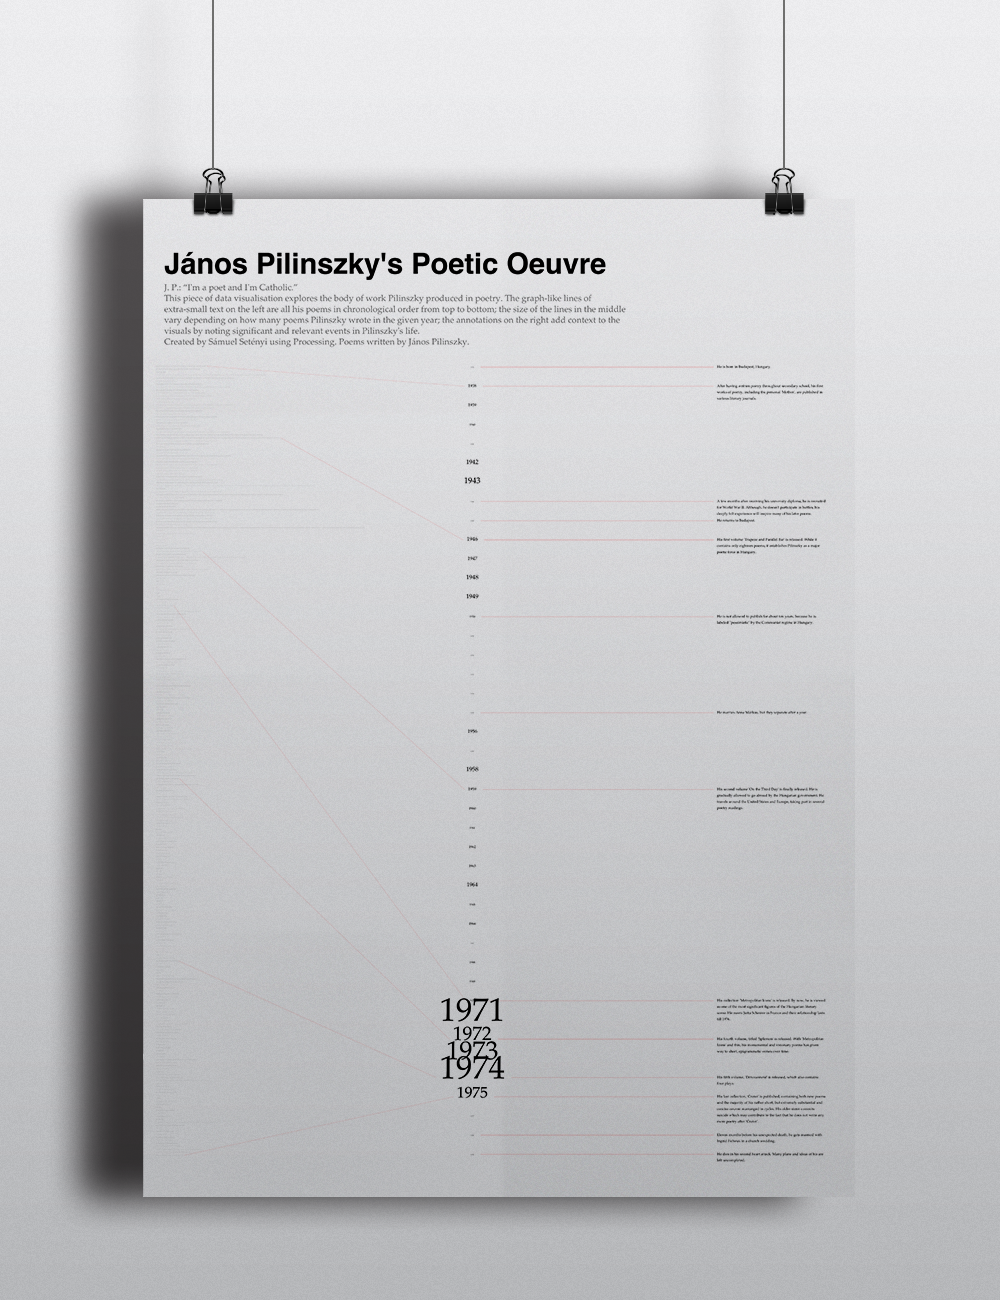 janos pilinszky data visualisation data-driven visual creative coding hungarian Poetry  literature text Digital Culture annotations procedural imagery poems infographic